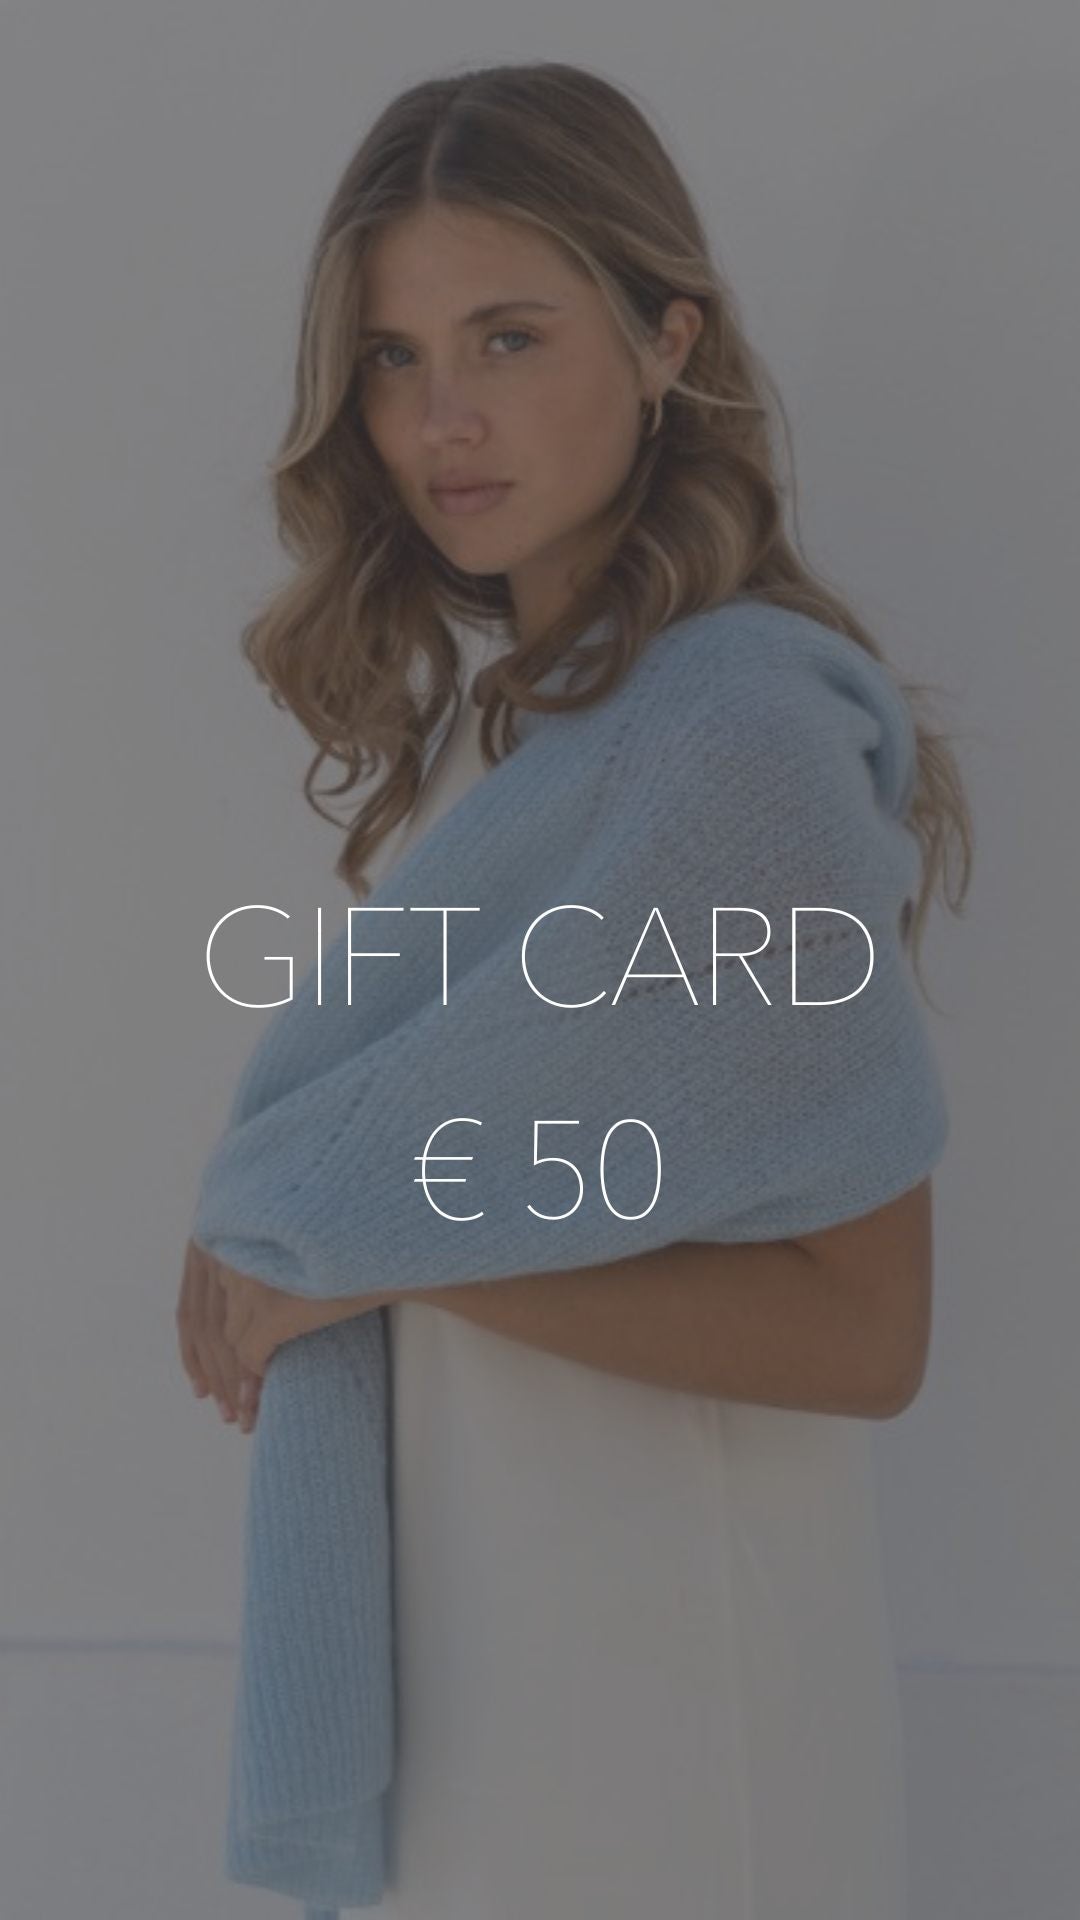 Gift Card - Give a Scarf!